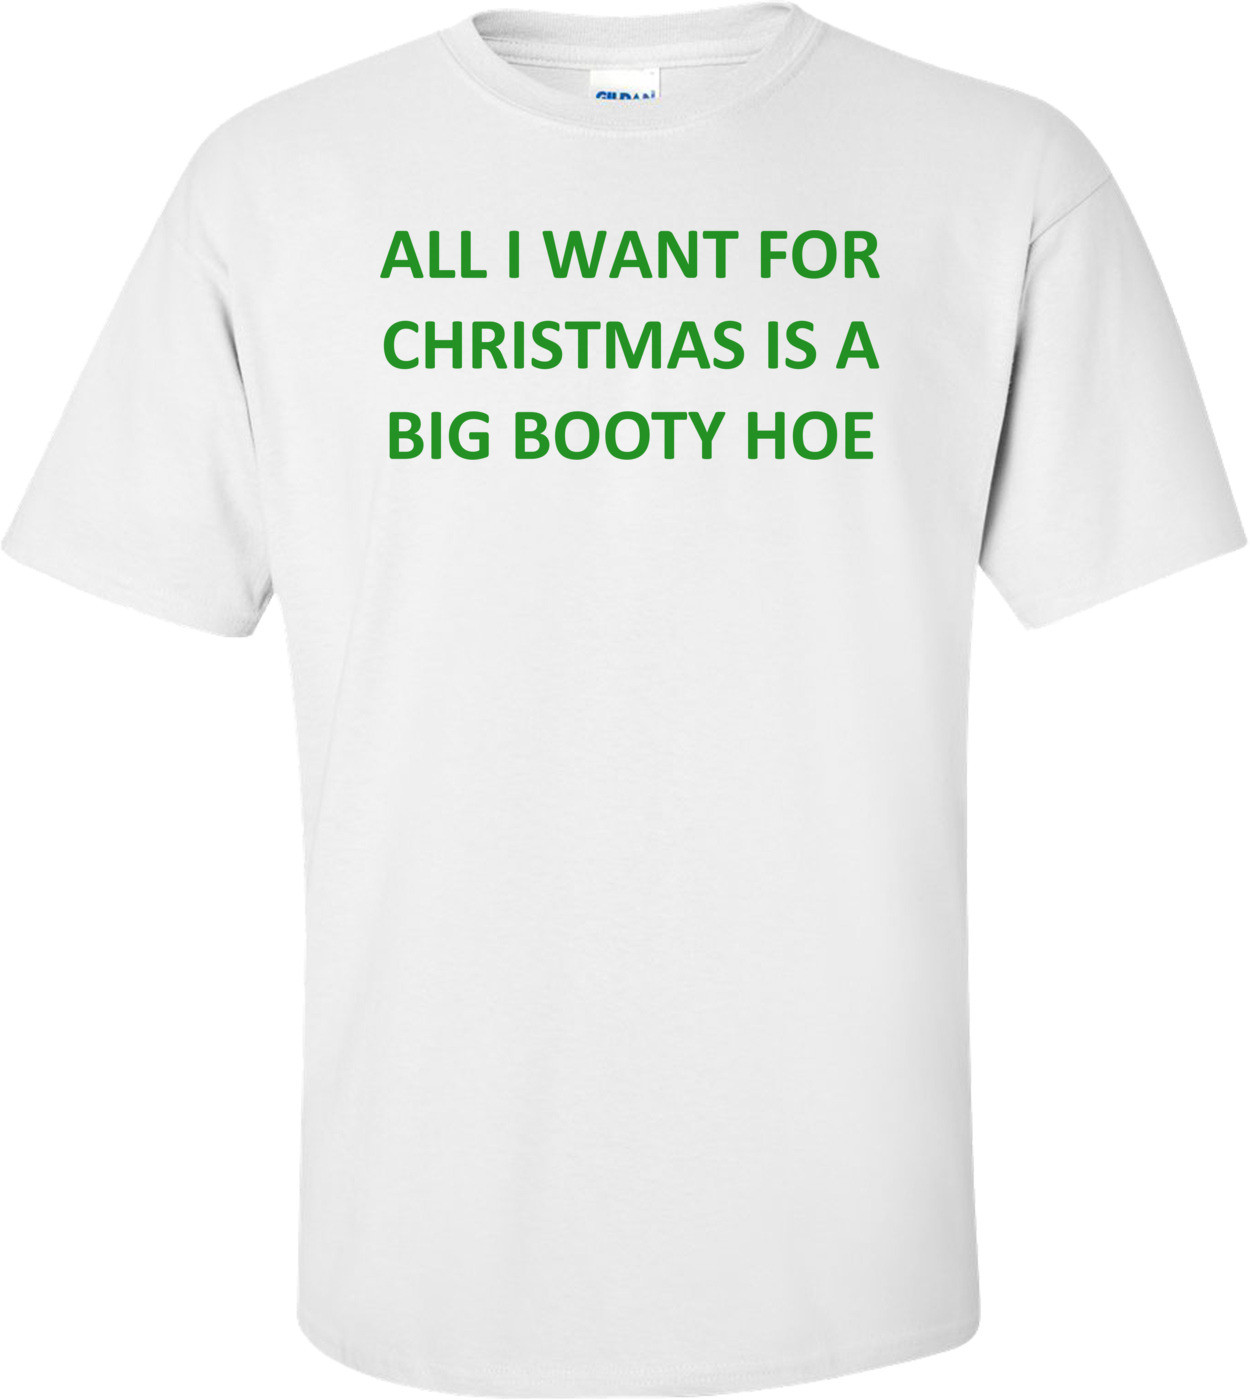 ALL I WANT FOR CHRISTMAS IS A BIG BOOTY HOE